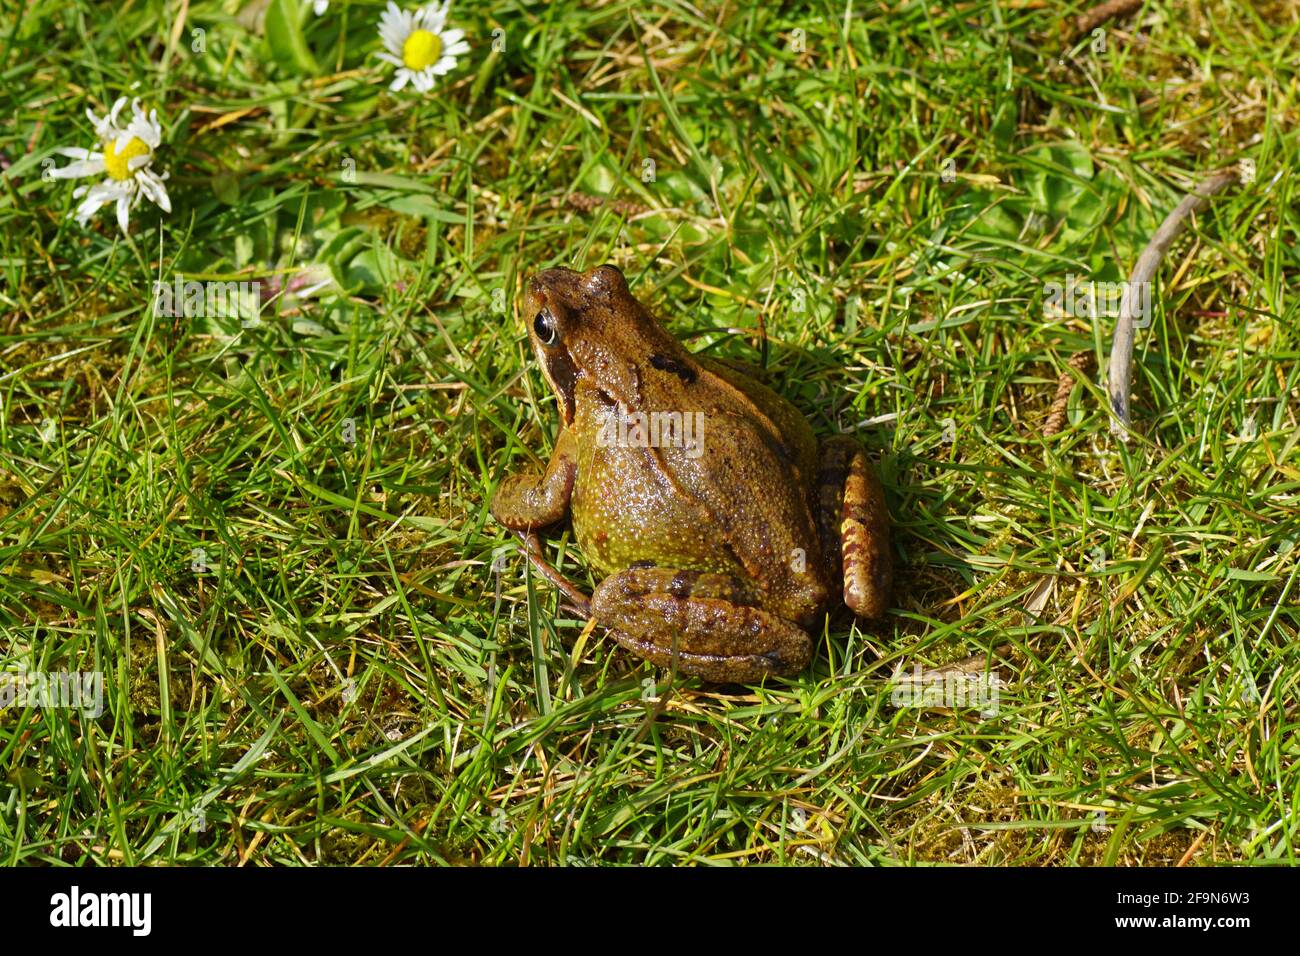 Common frog (Rana temporaria). Family true frogs (Ranidae). On the lawn in a Dutch garden in the spring. April, Netherlands. Stock Photo